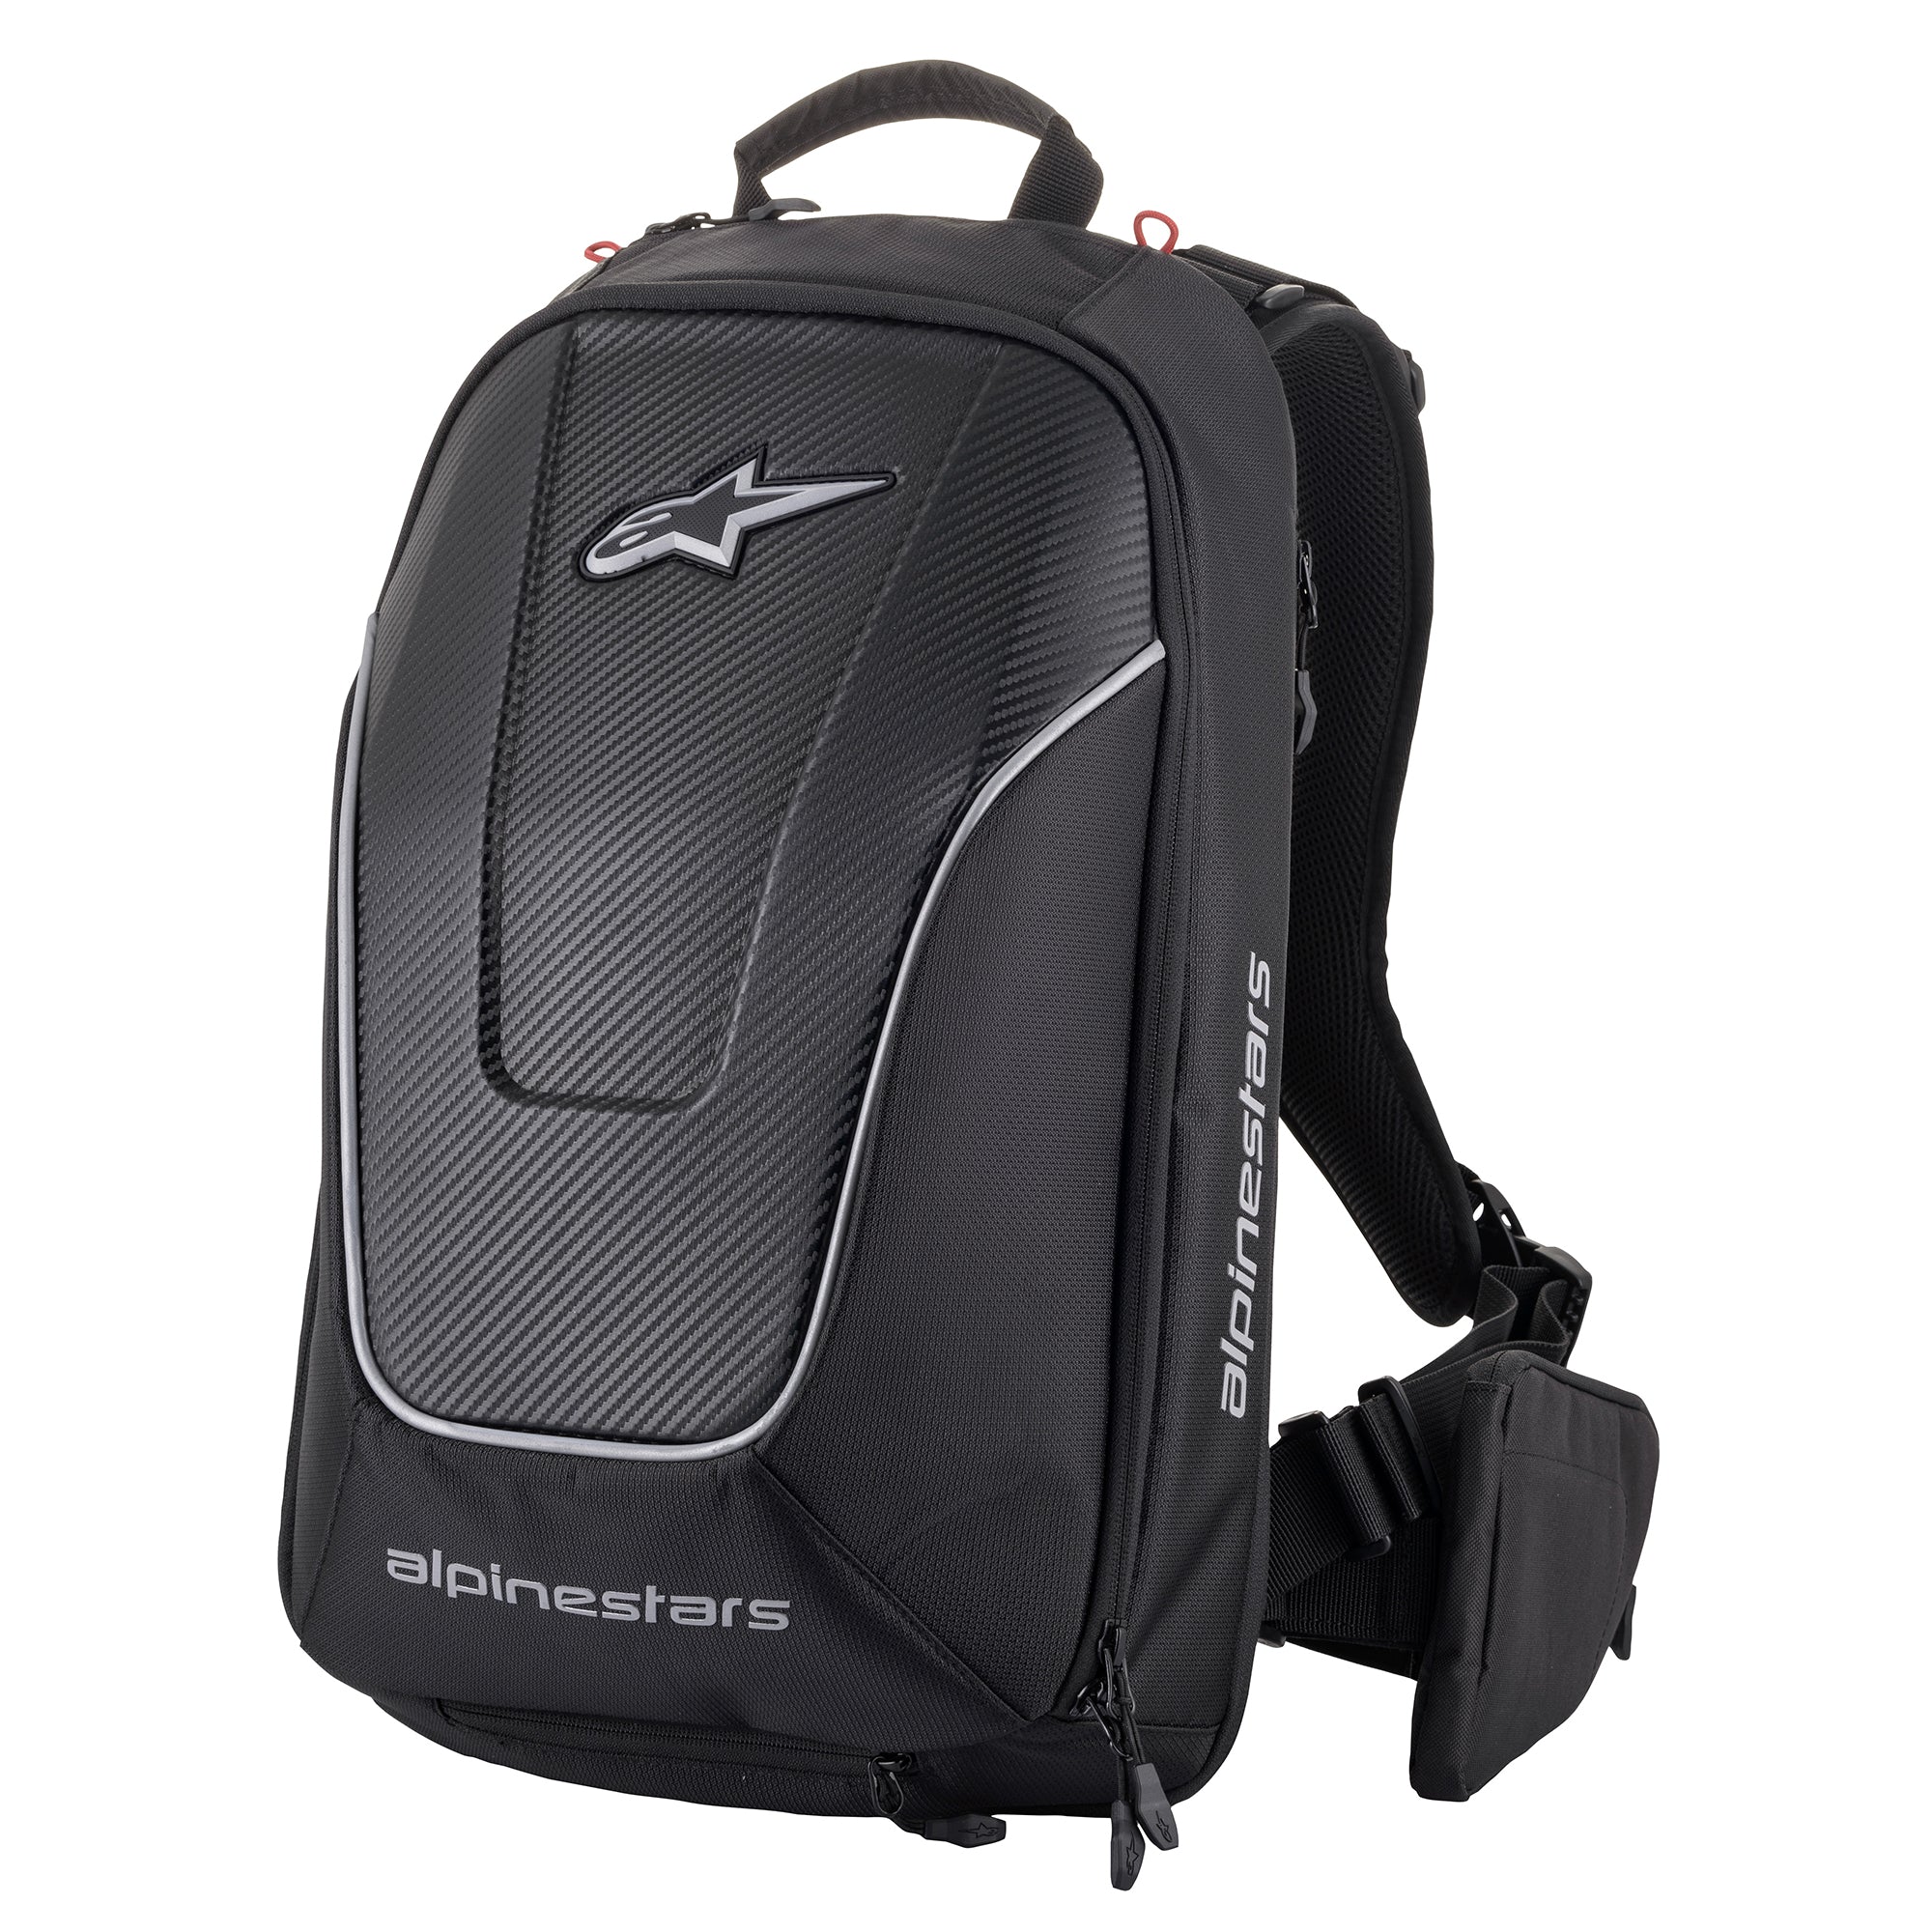 Charger Pro Backpack